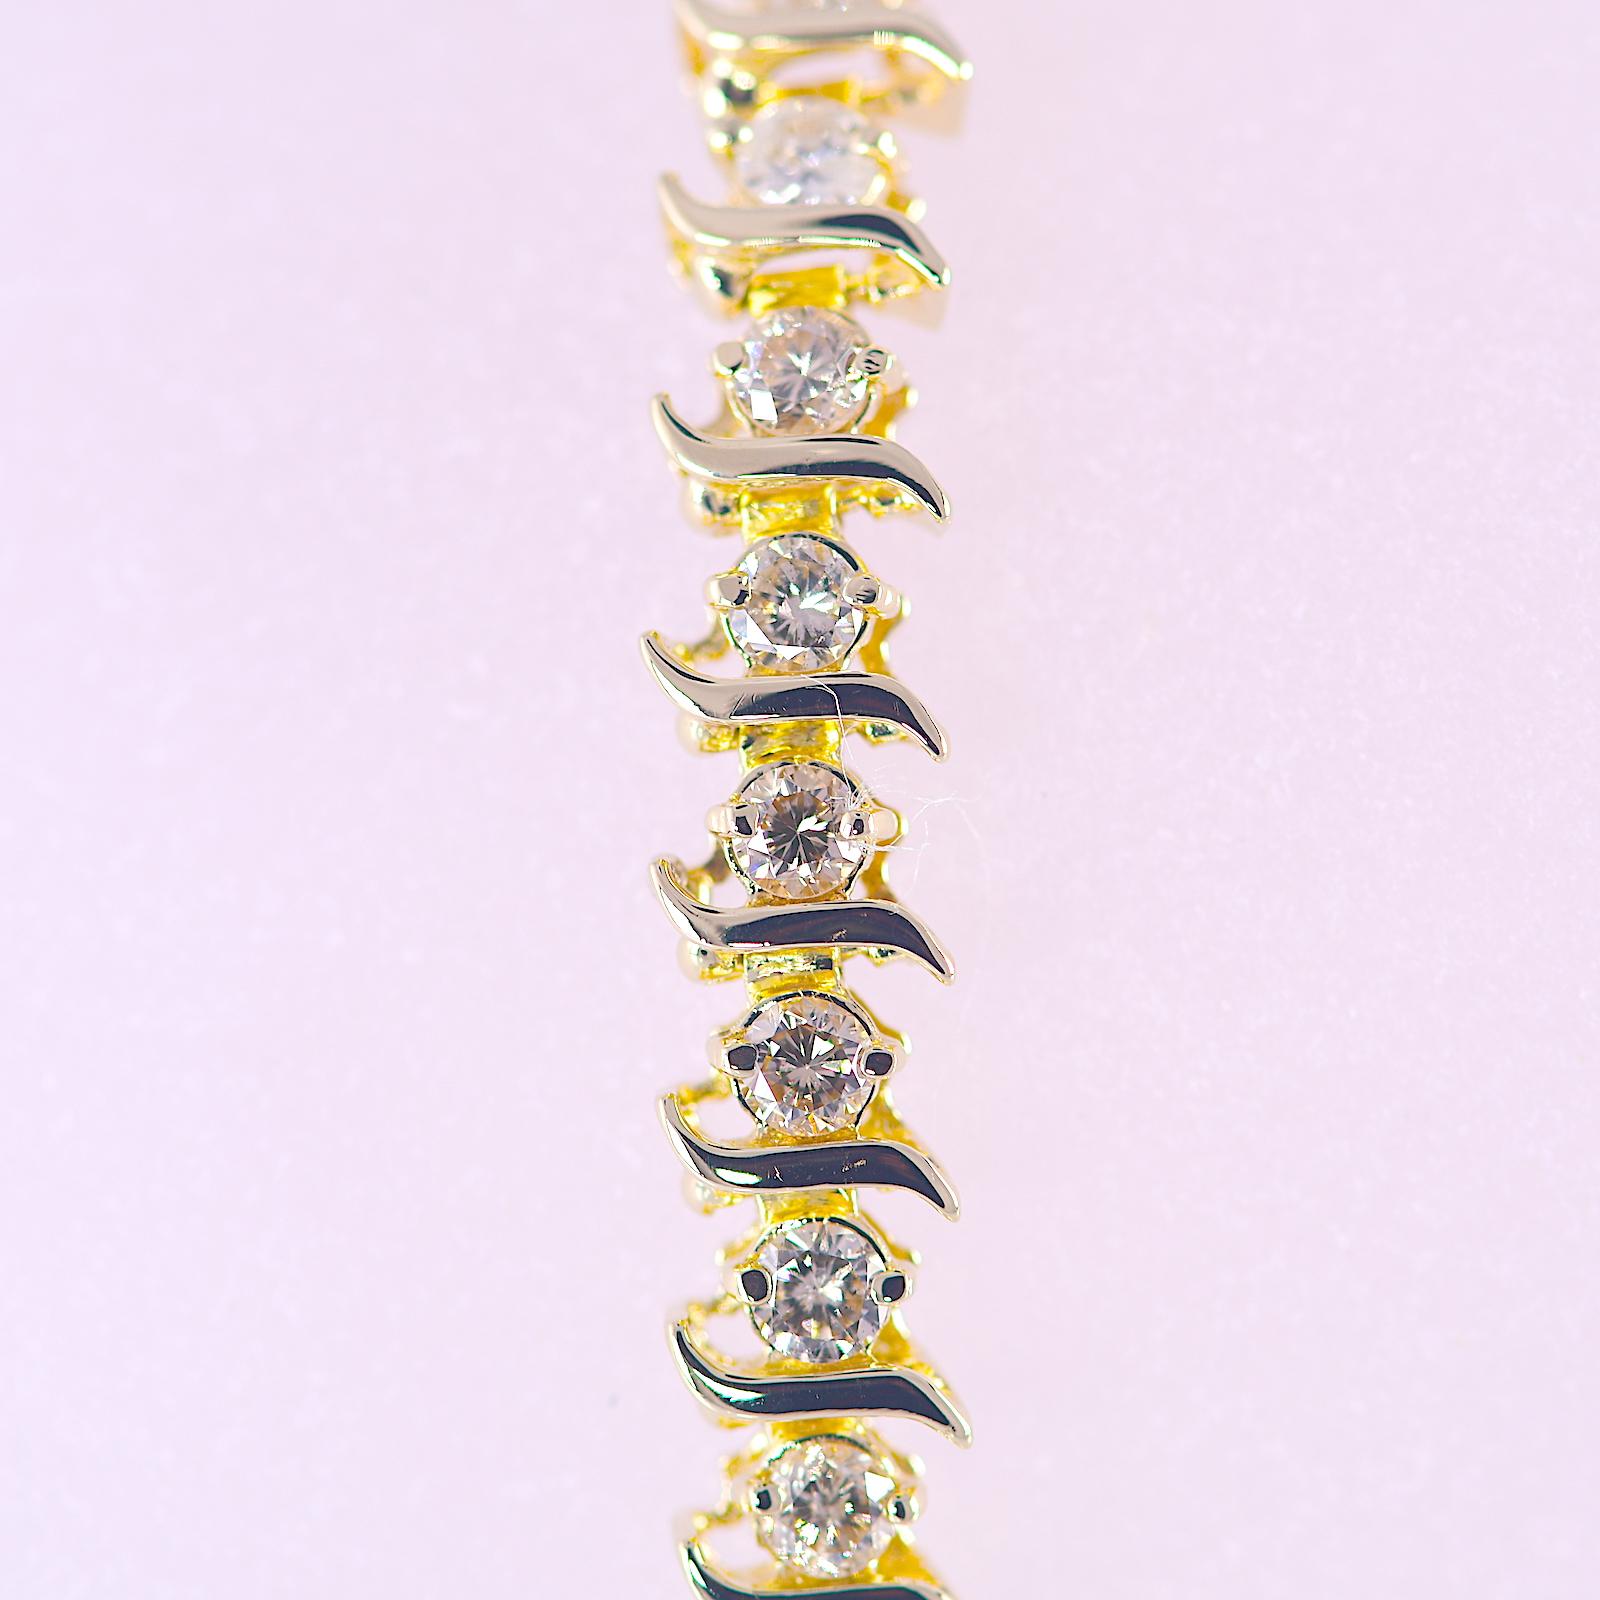 4 Carat Total Weight Natural Diamond Tennis Bracelet Yellow Gold 14K 13.40 grams 7 inch
 
Stones: Natural Diamond  TCW: 4  Color: Champagne   Clarity: SI1- I2   
Cut: Round
Metal: Yellow Gold 
Purity: 14K 
Size: 7 inch
Style: Tennis Bracelet 
Total